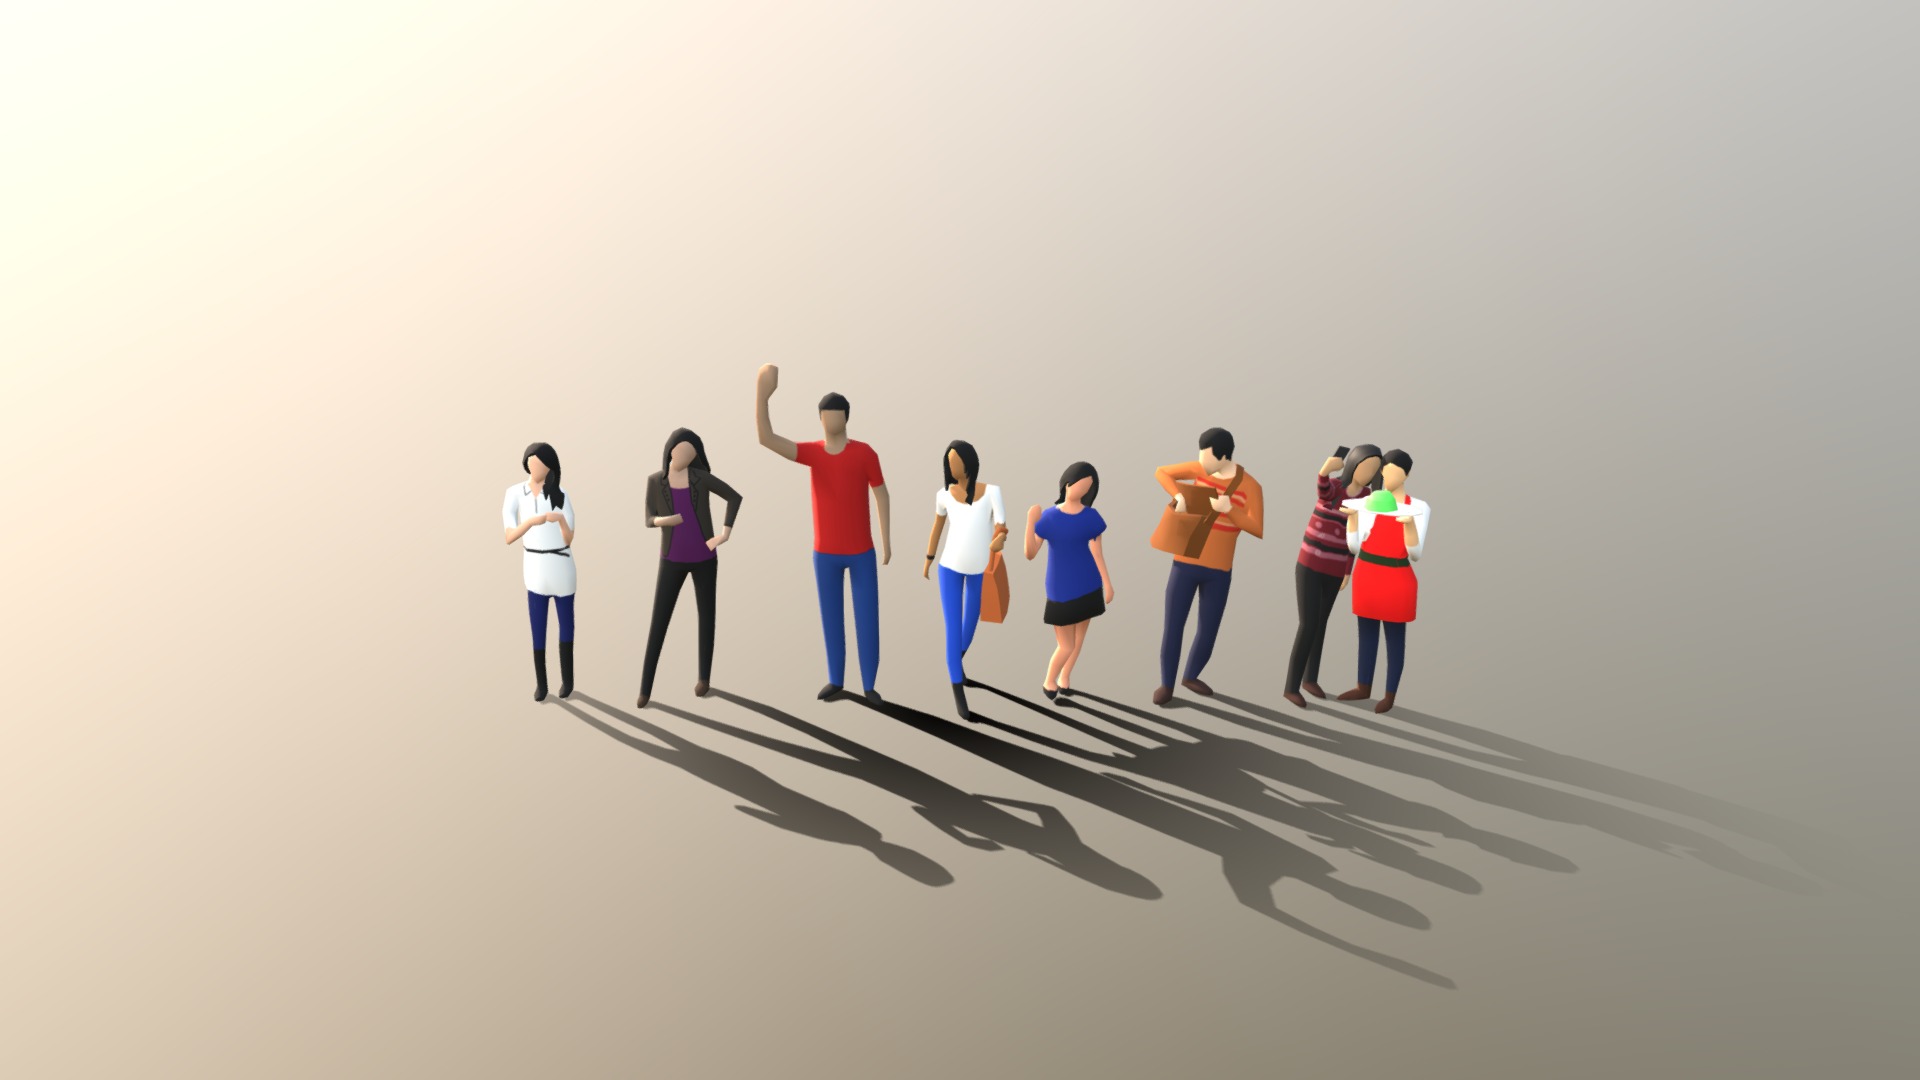 3D model Low Poly Urban People Pack - This is a 3D model of the Low Poly Urban People Pack. The 3D model is about a group of people standing on a road.